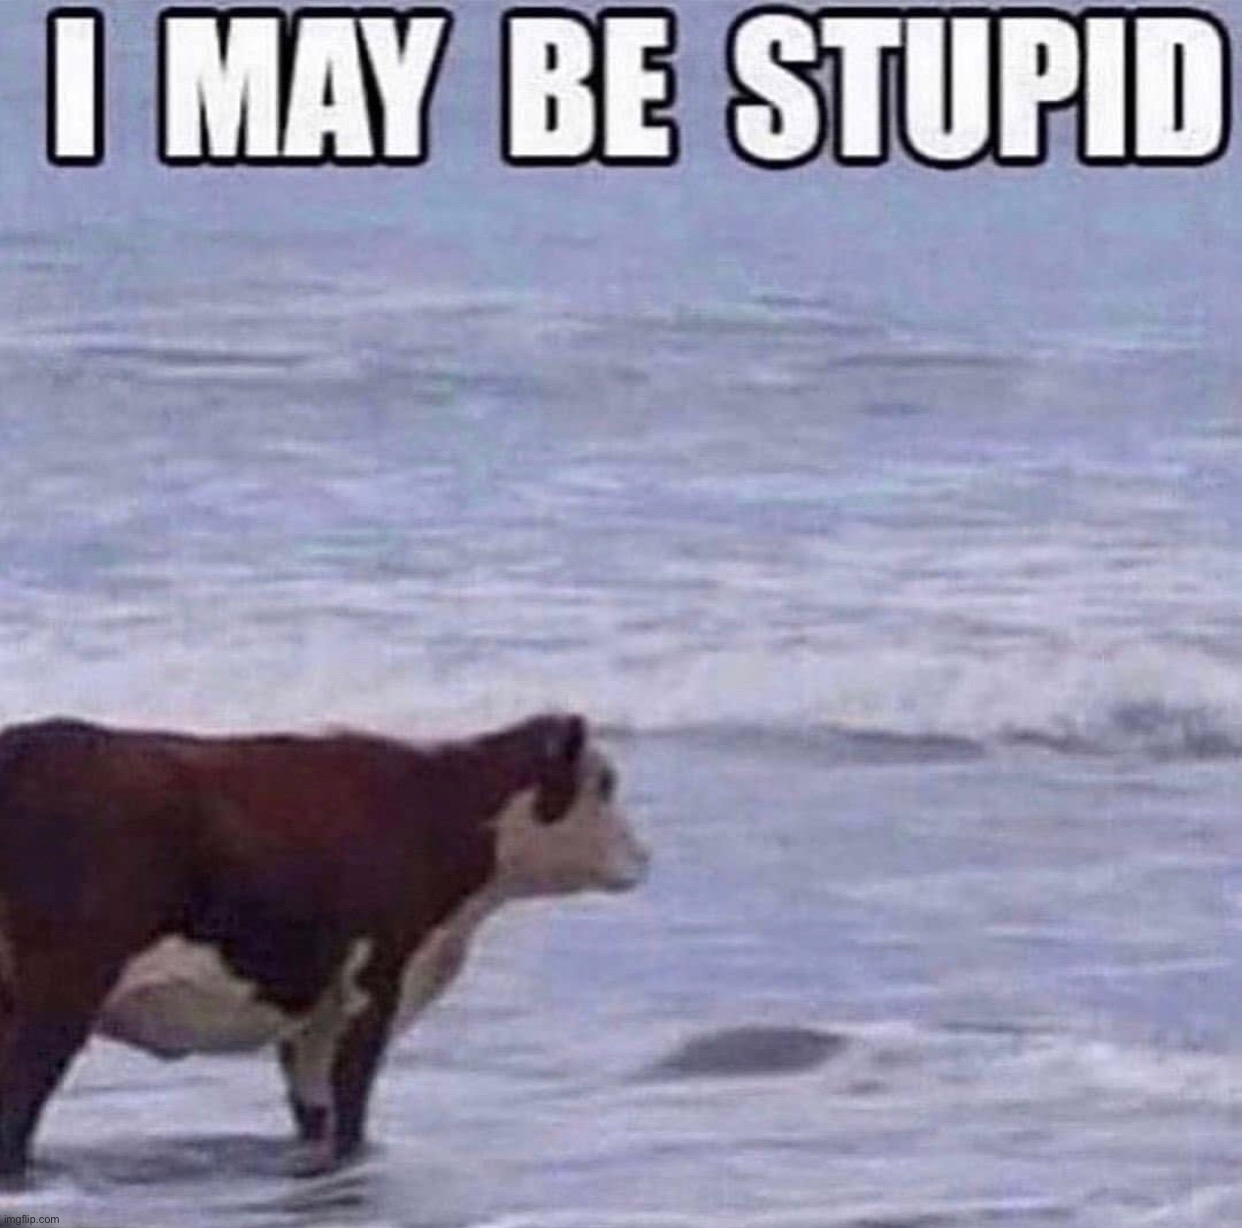 I may be stupid | image tagged in meme | made w/ Imgflip meme maker